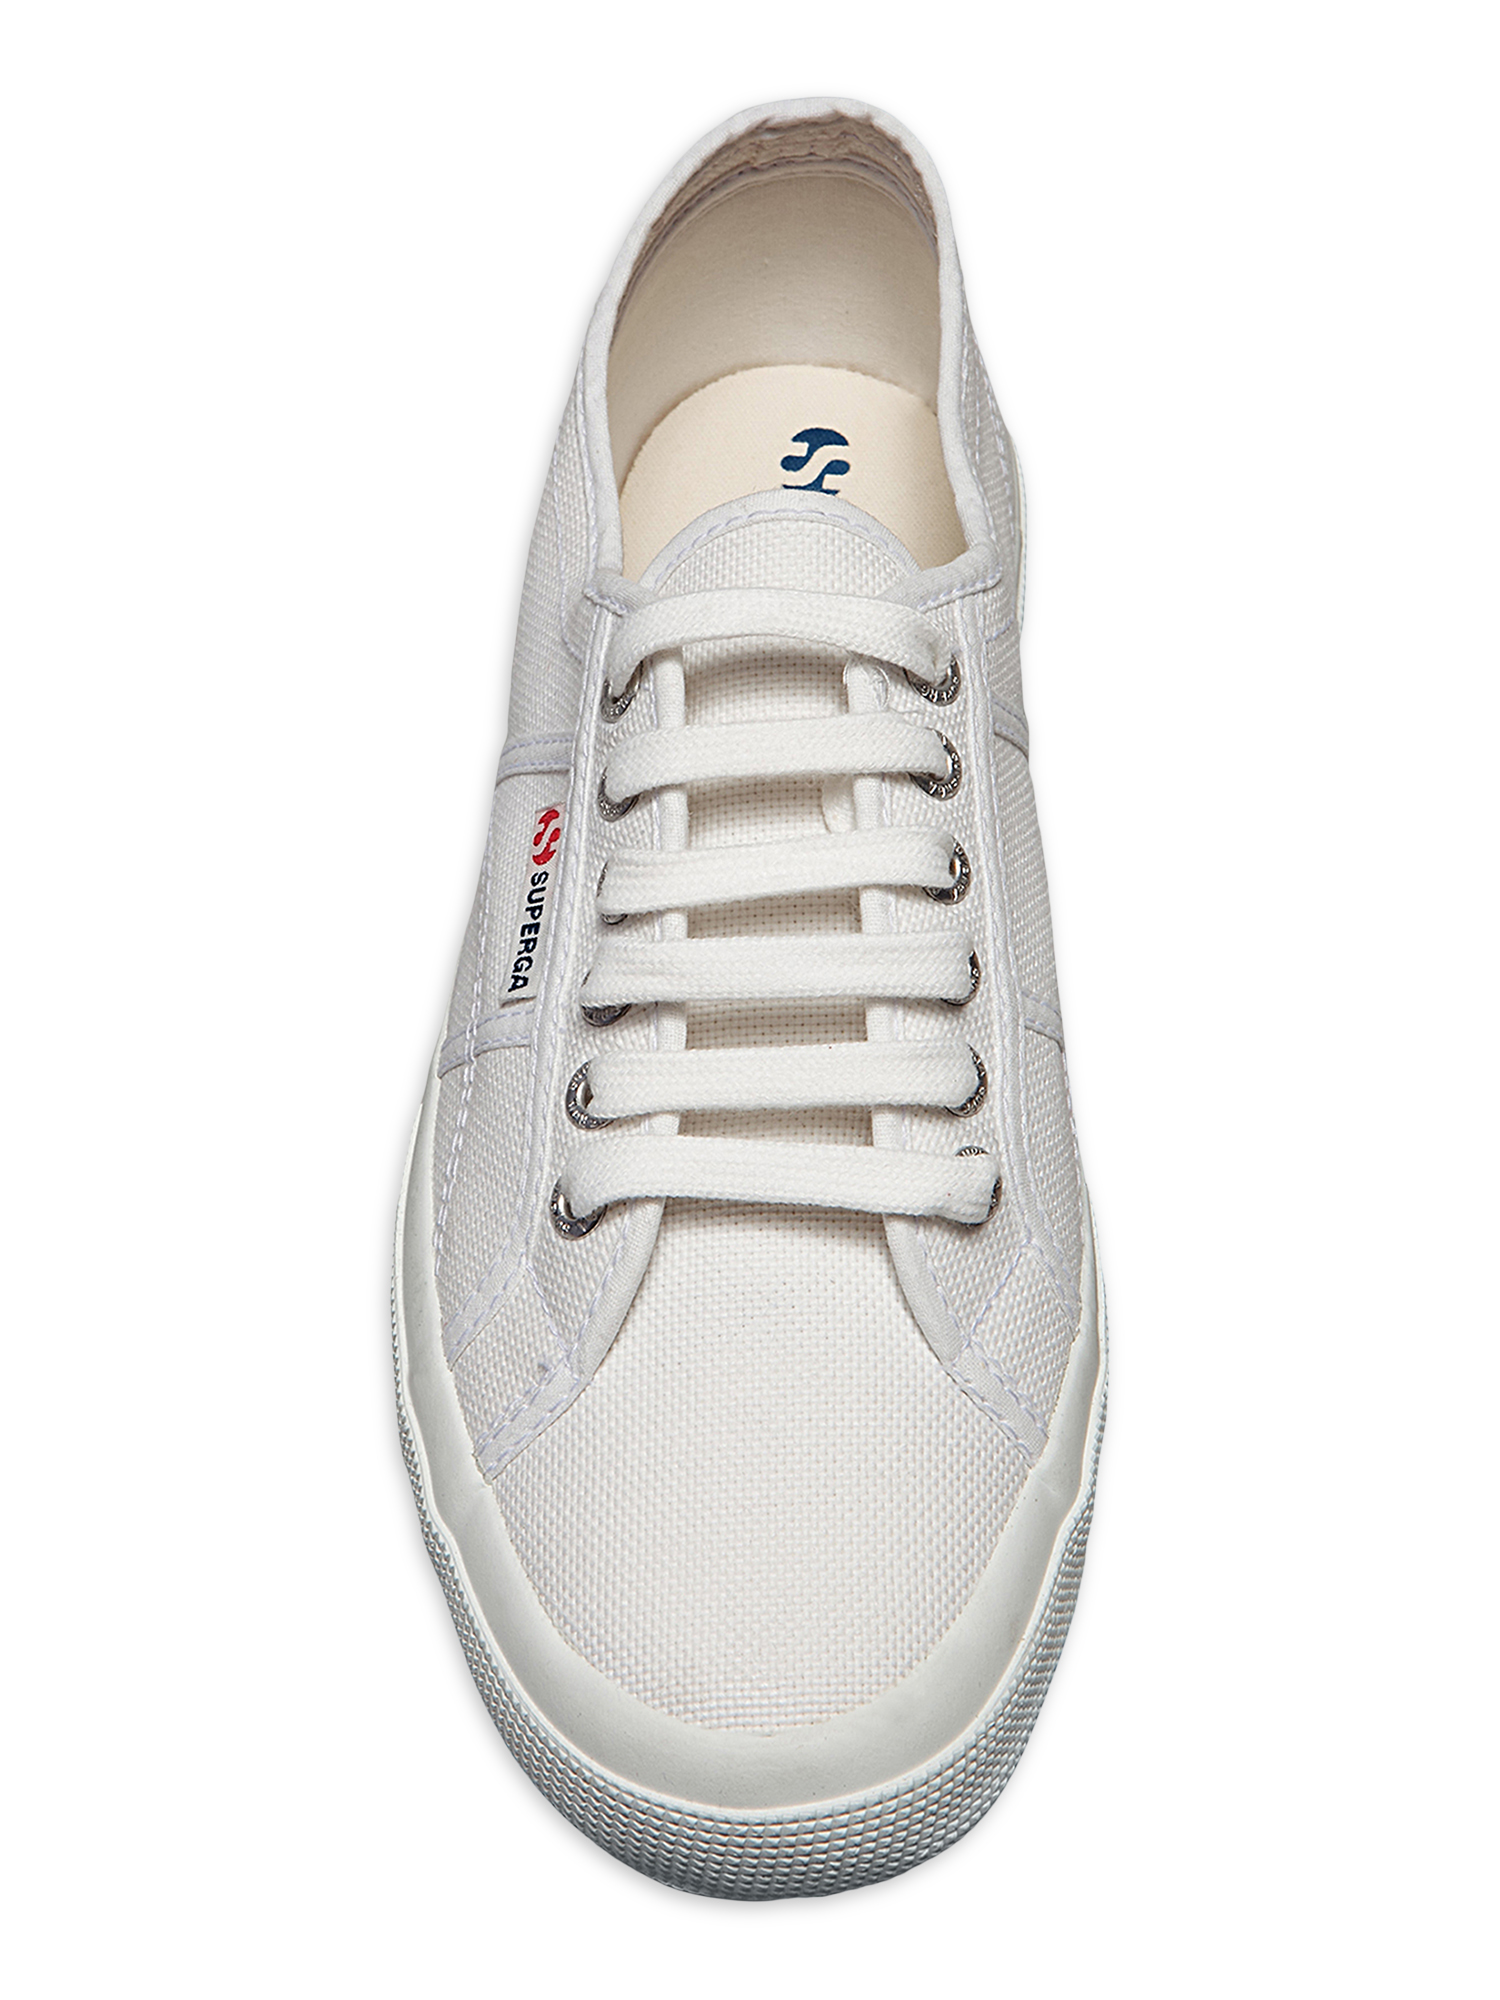 Superga 2750 Cotu Classic Lace-up Canvas Sneaker (Women's) - image 2 of 10